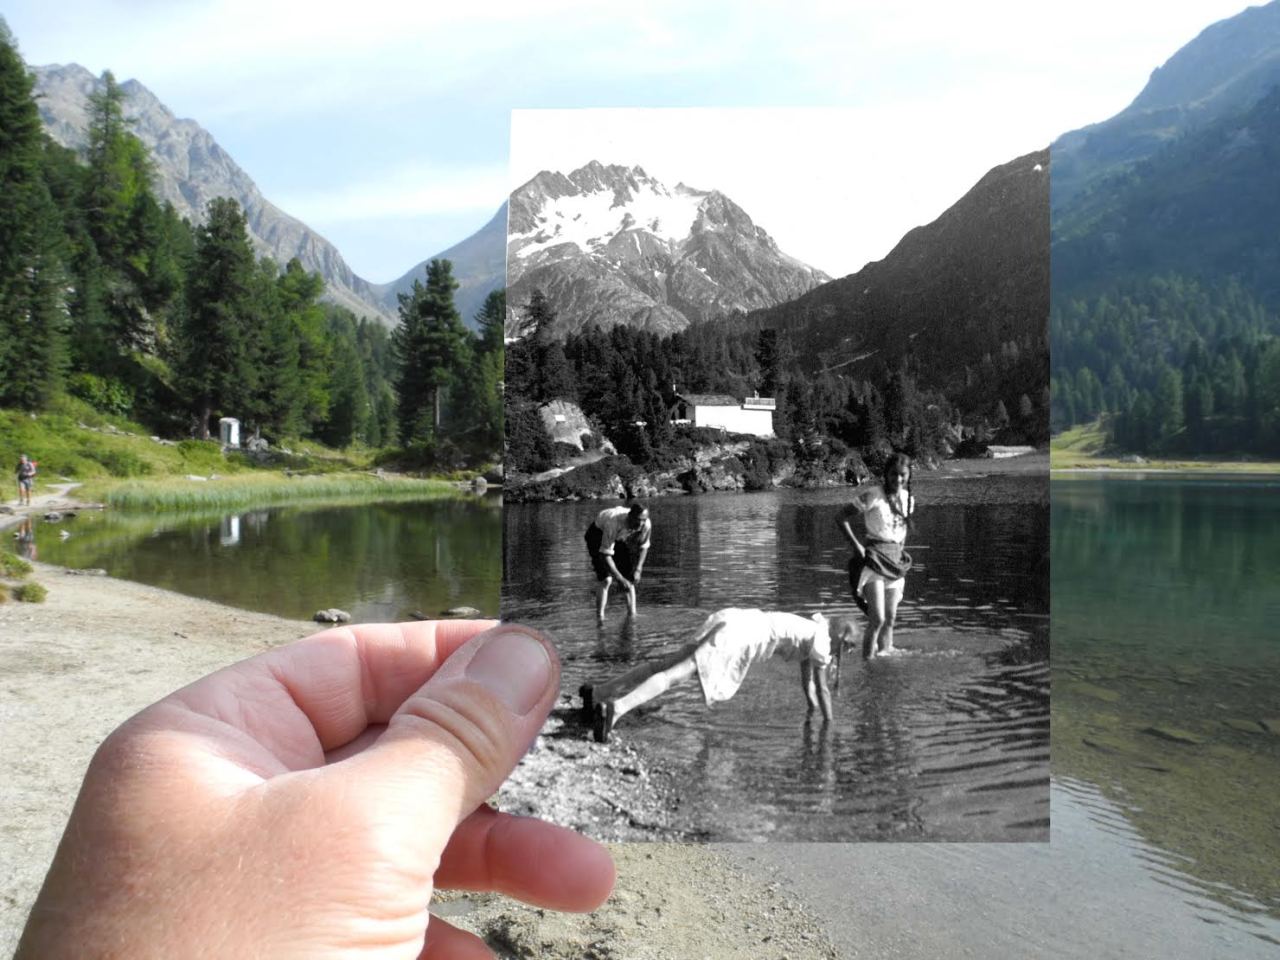 Dear Photograph,It was 70 years ago when my mother dipped her toes in Lake Cavloc, Switzerland along side her father and sister. Beauty was all around them and so were the echoes of youth. My mother&#8217;s view has changed now that she lives in a nursing home. Wouldn&#8217;t it have been something if the waters they had danced in had washed the fountain of youth over them&#8230;Peter